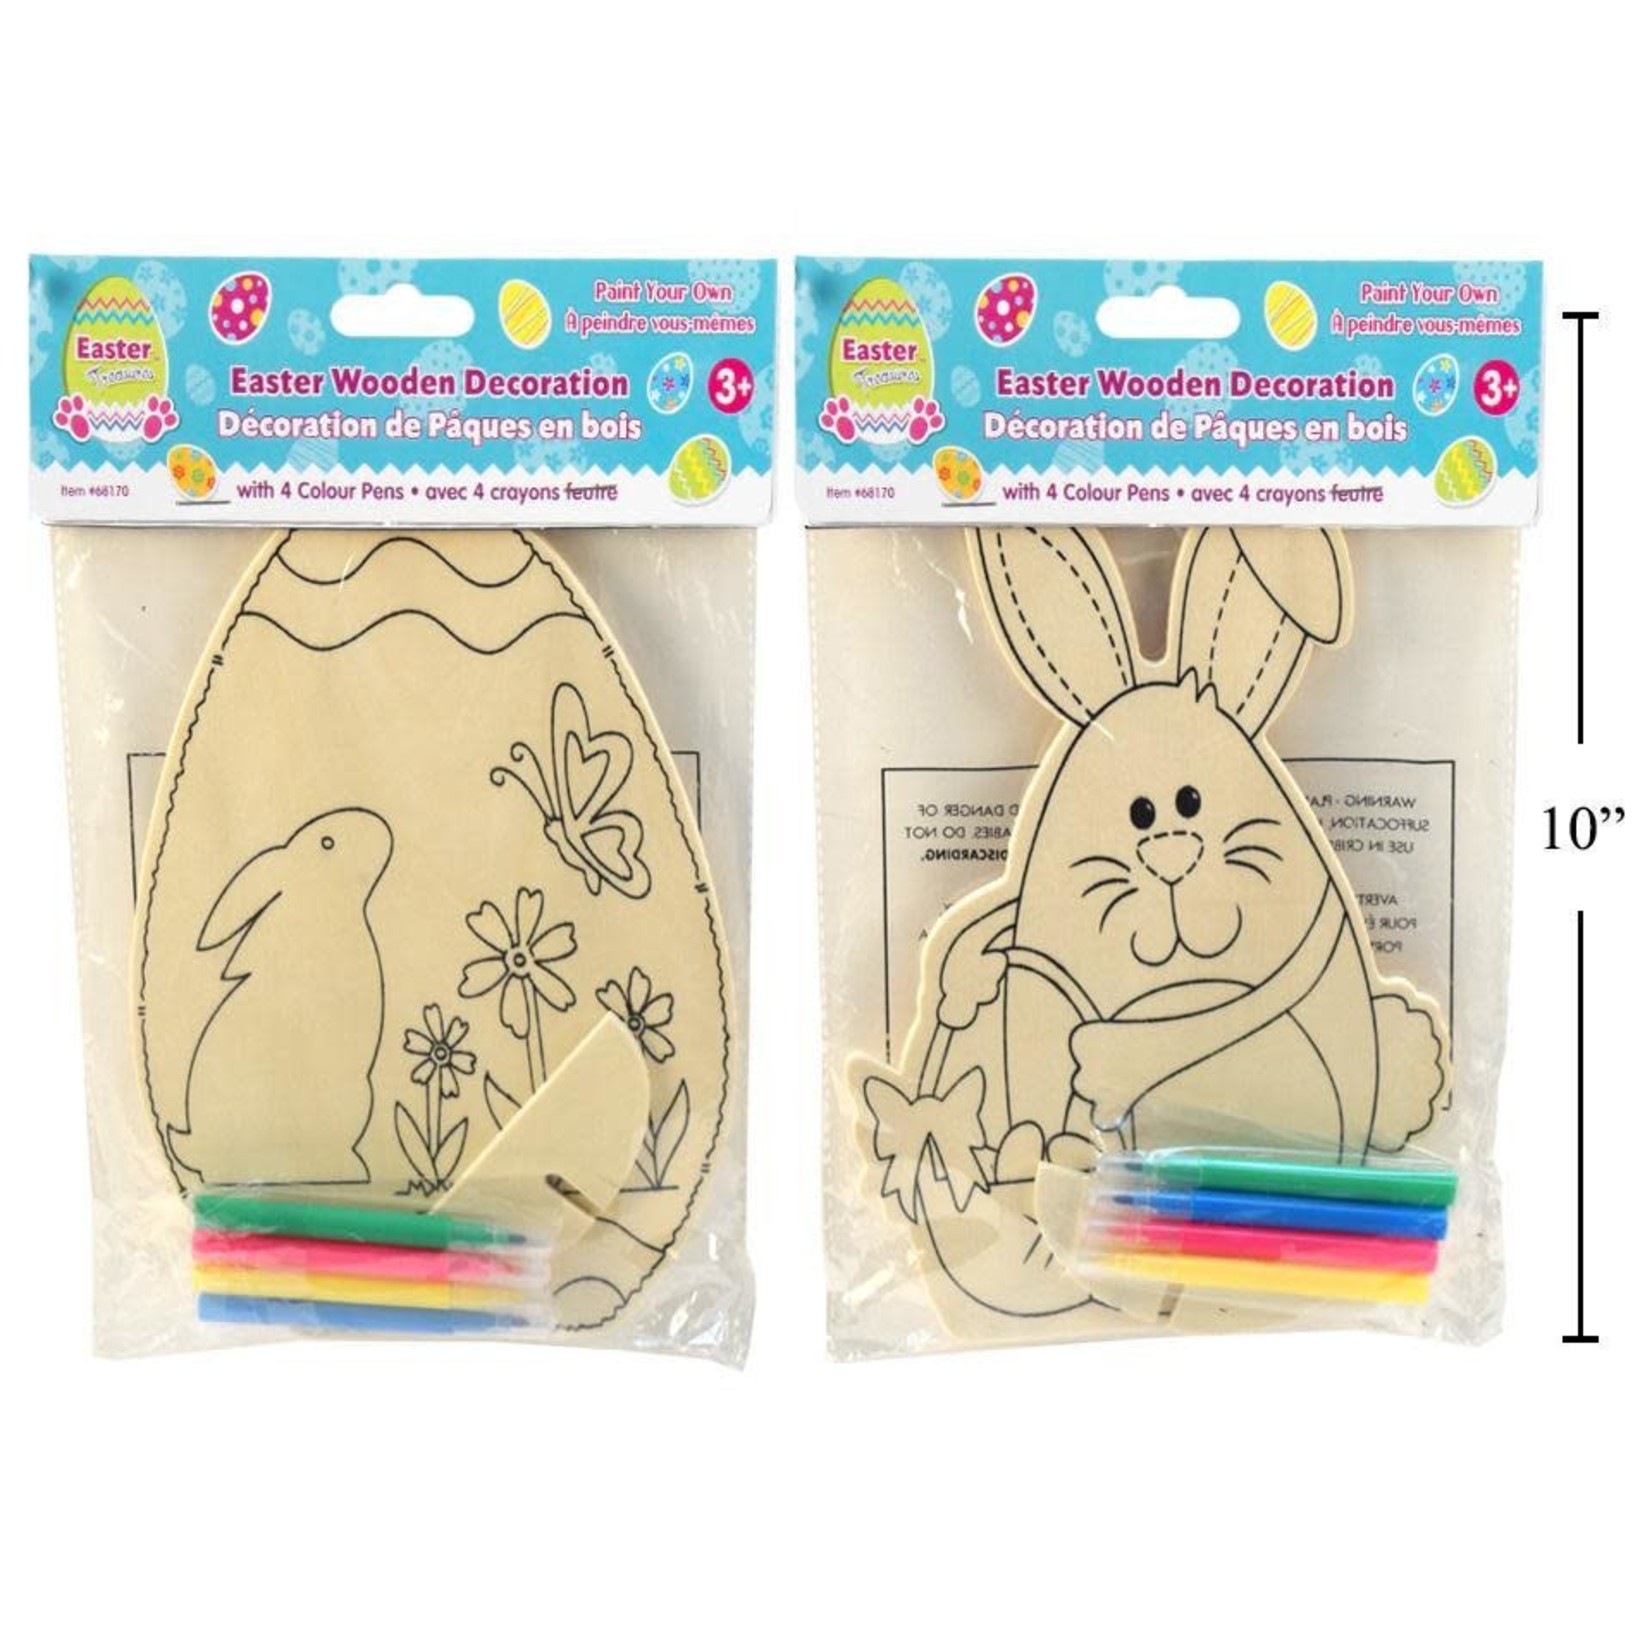 EASTER WOODEN DECORATION